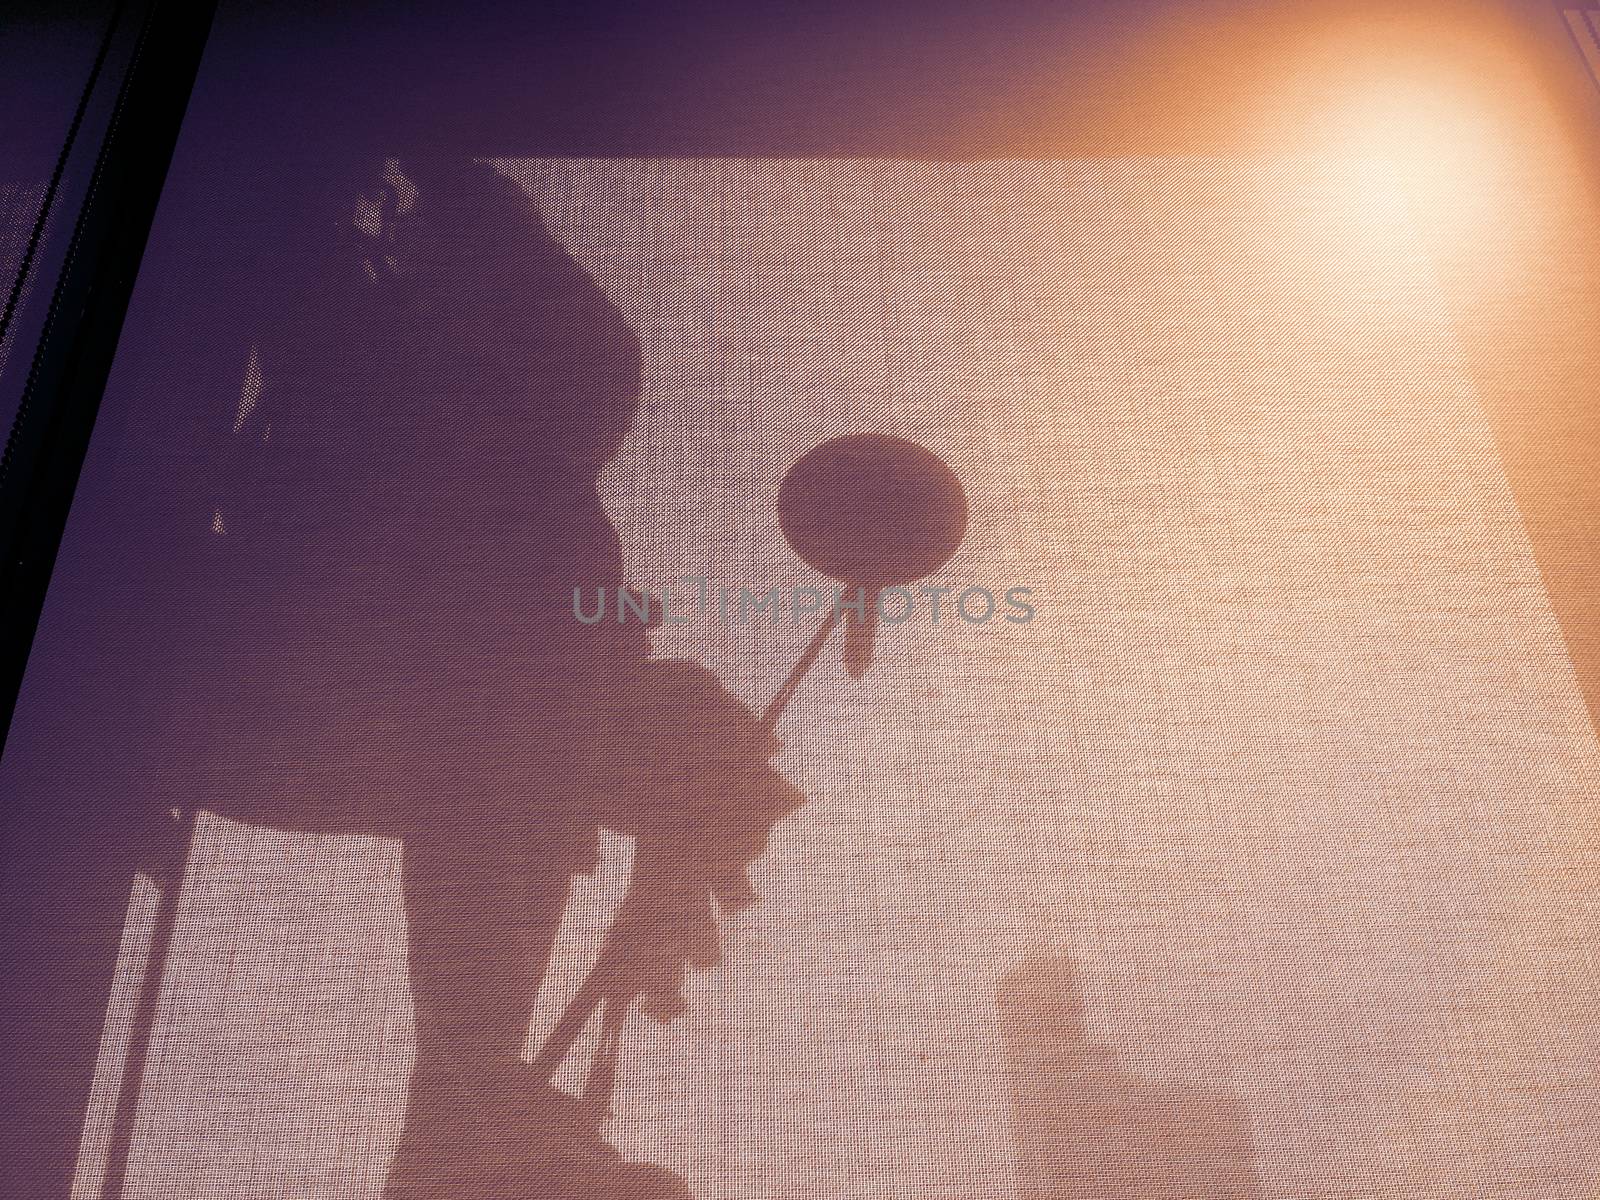 Silhouette images and shoot through transperent curtain effect from inside building which a man cleaning the window of high office building with his equipment such as wipe, sponge, bucket and high risk of danger